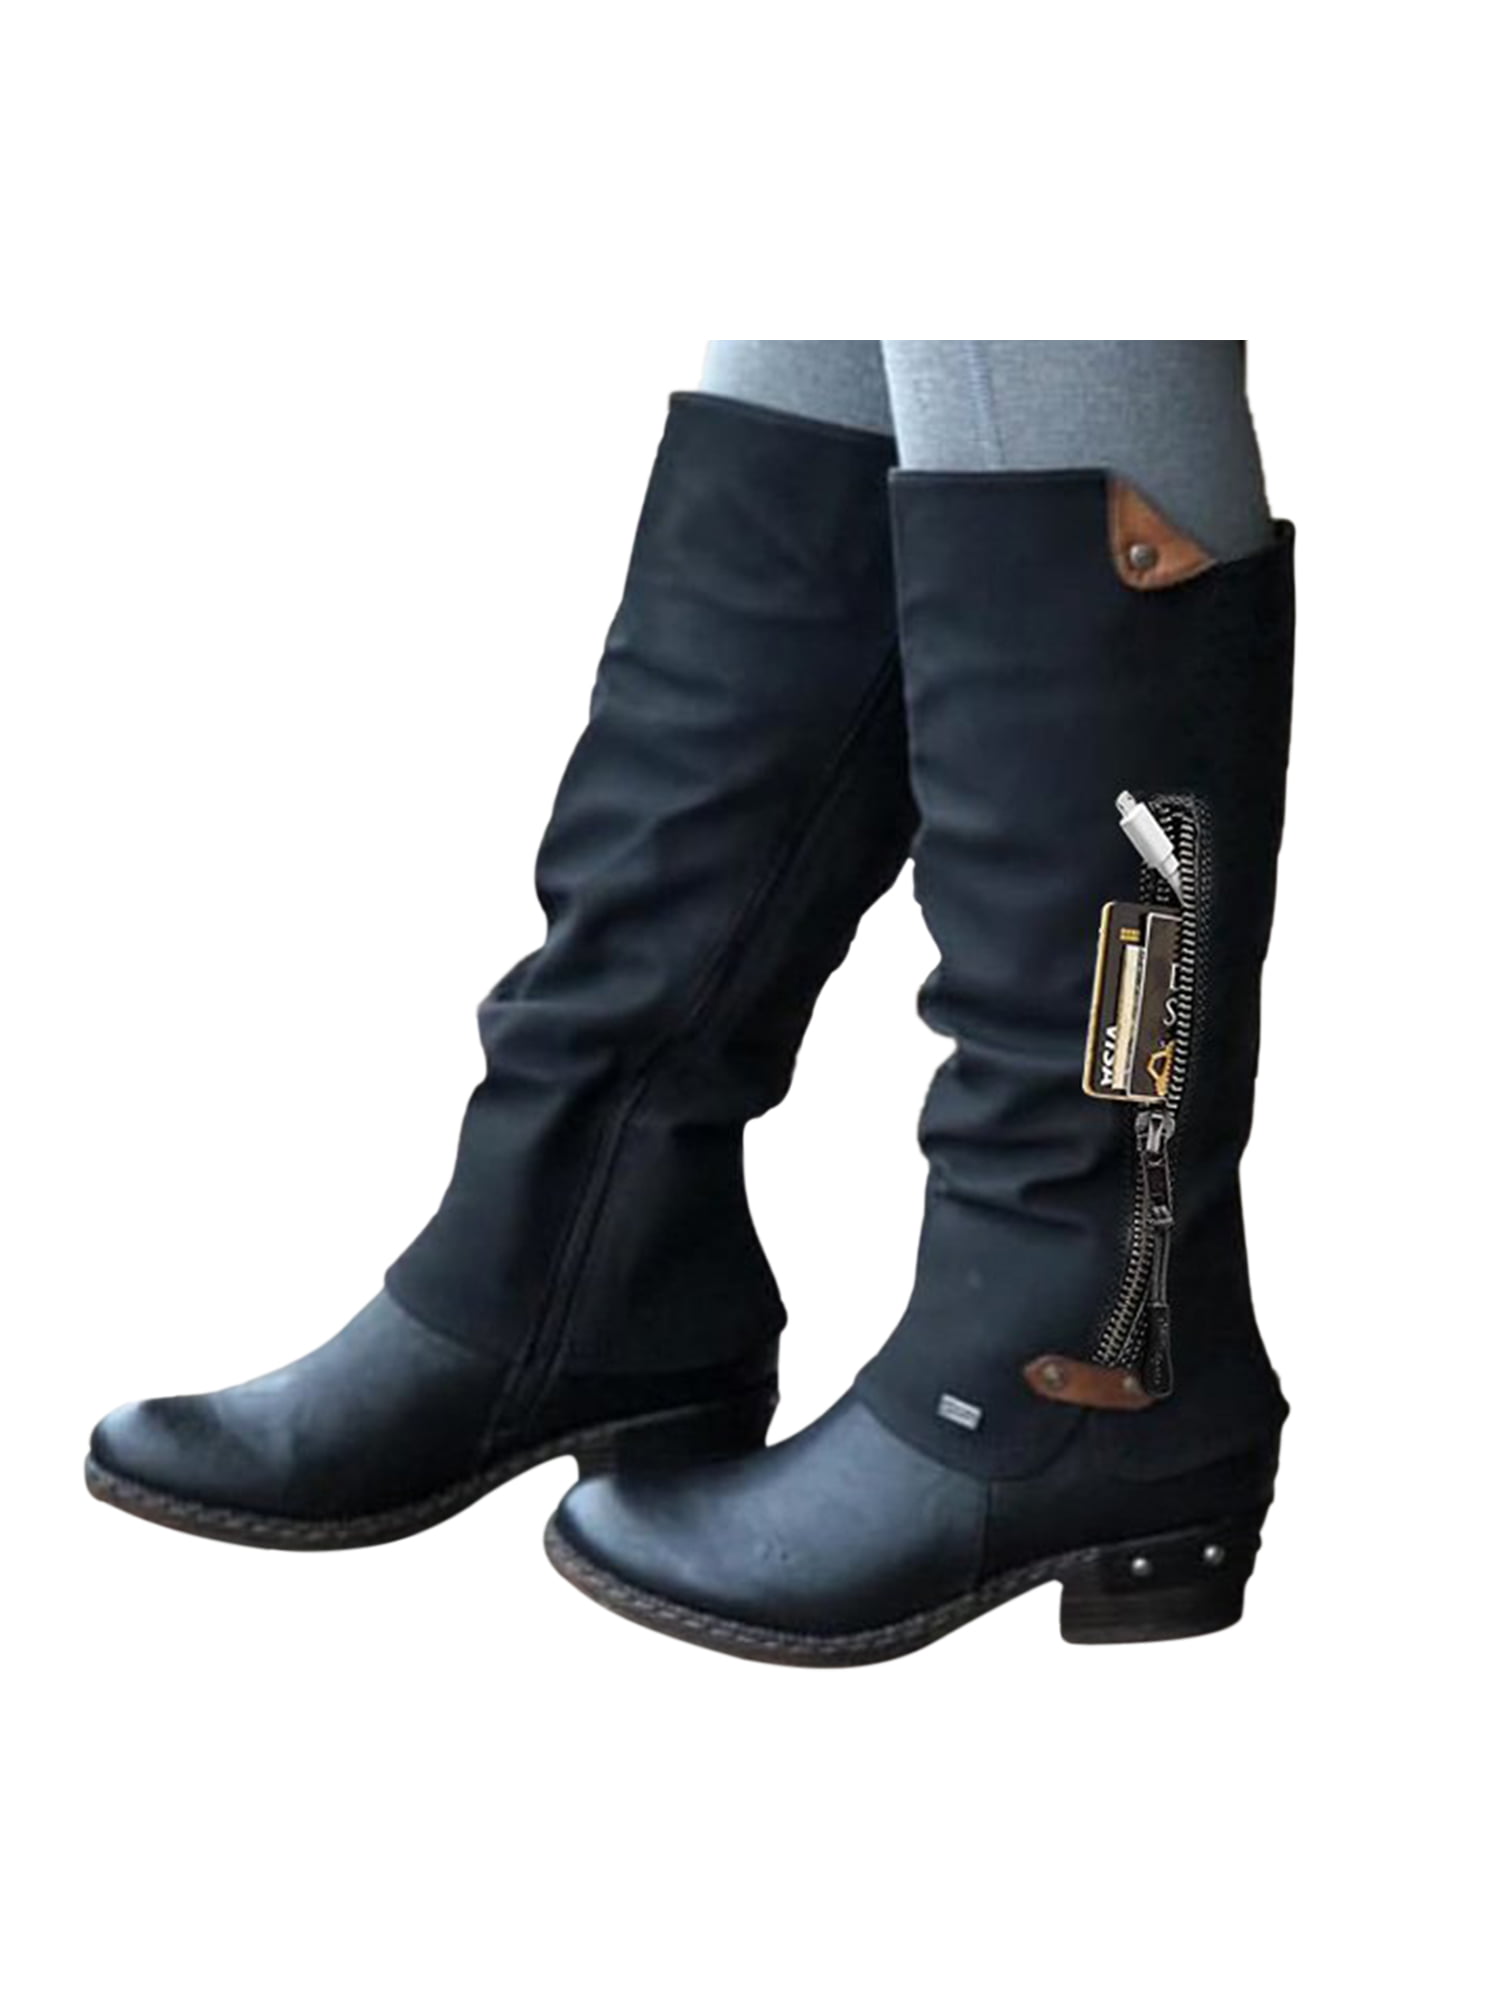 Details about  / Women Round Toe Zip Up Block Heel Leather Mid Calf Boots Motorcycle Boots Shoes